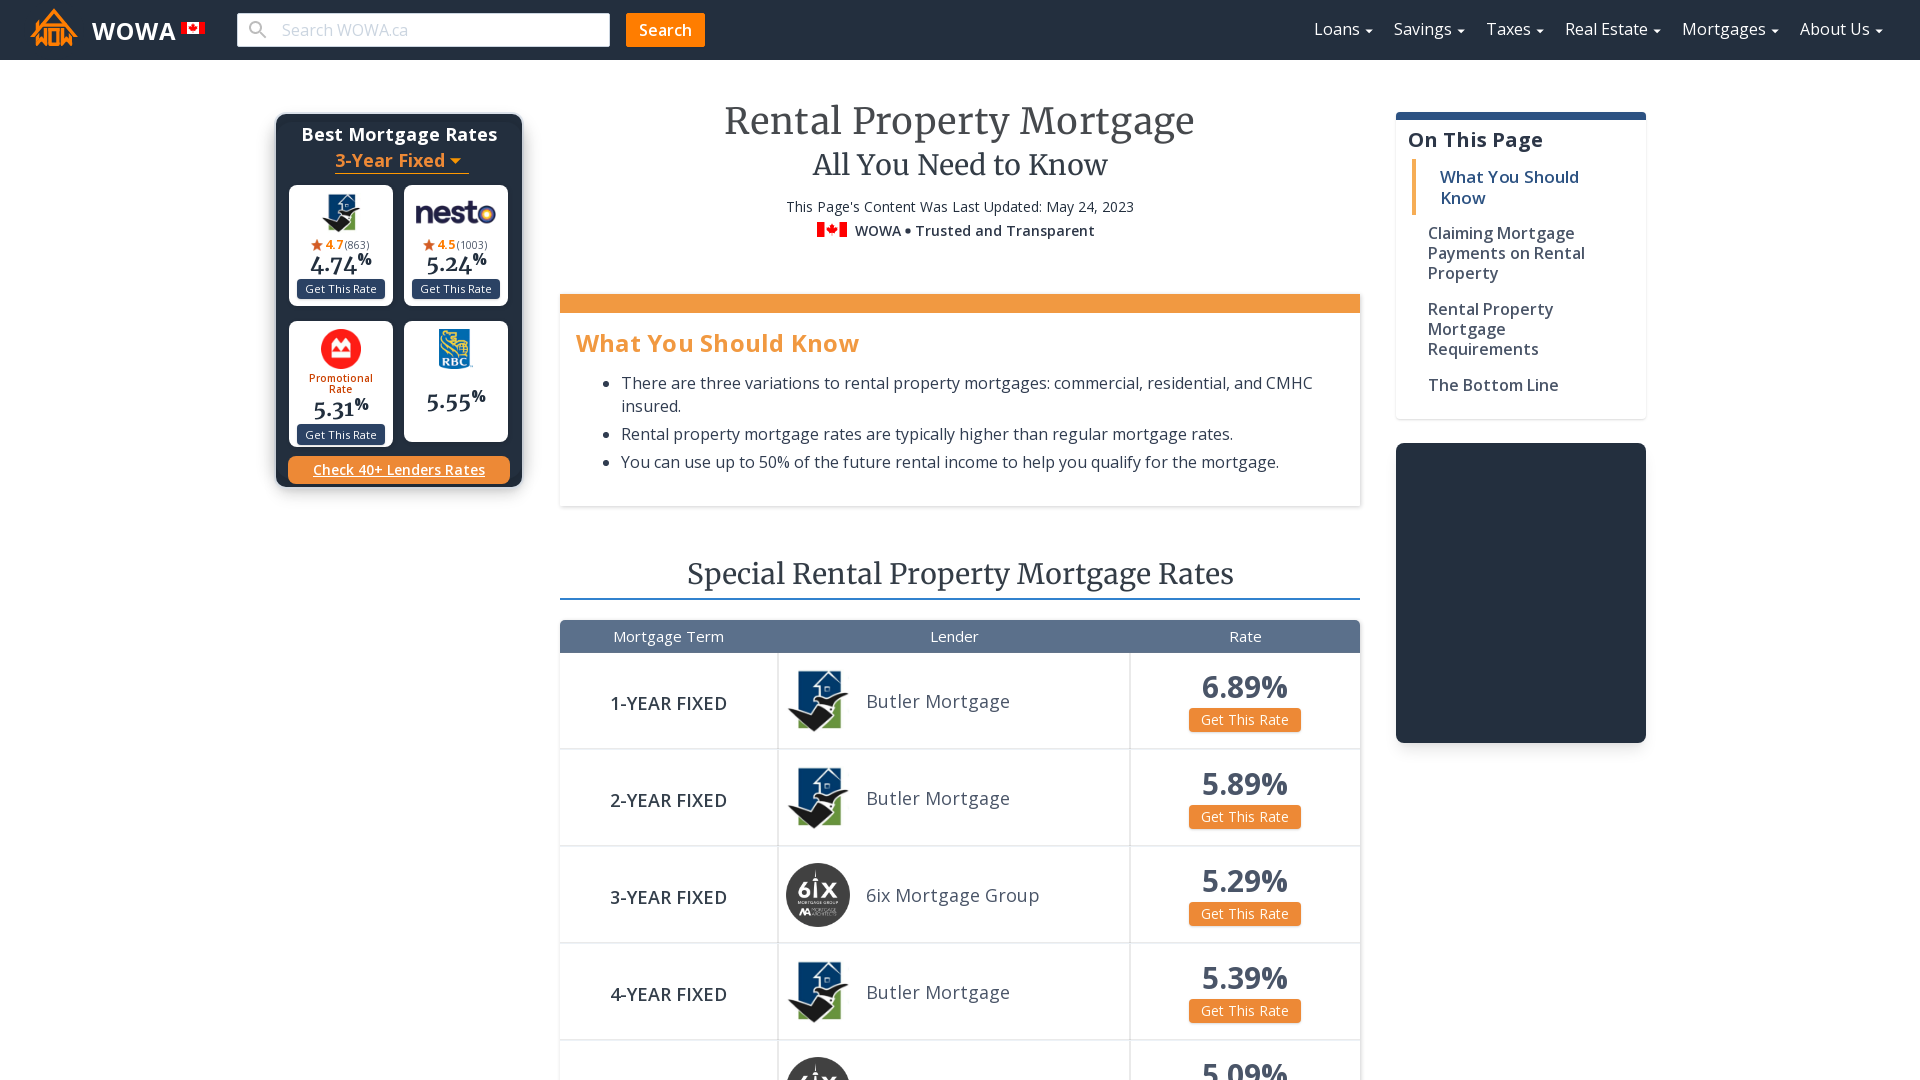 rental-property-mortgage-all-you-need-to-know-wowa-ca